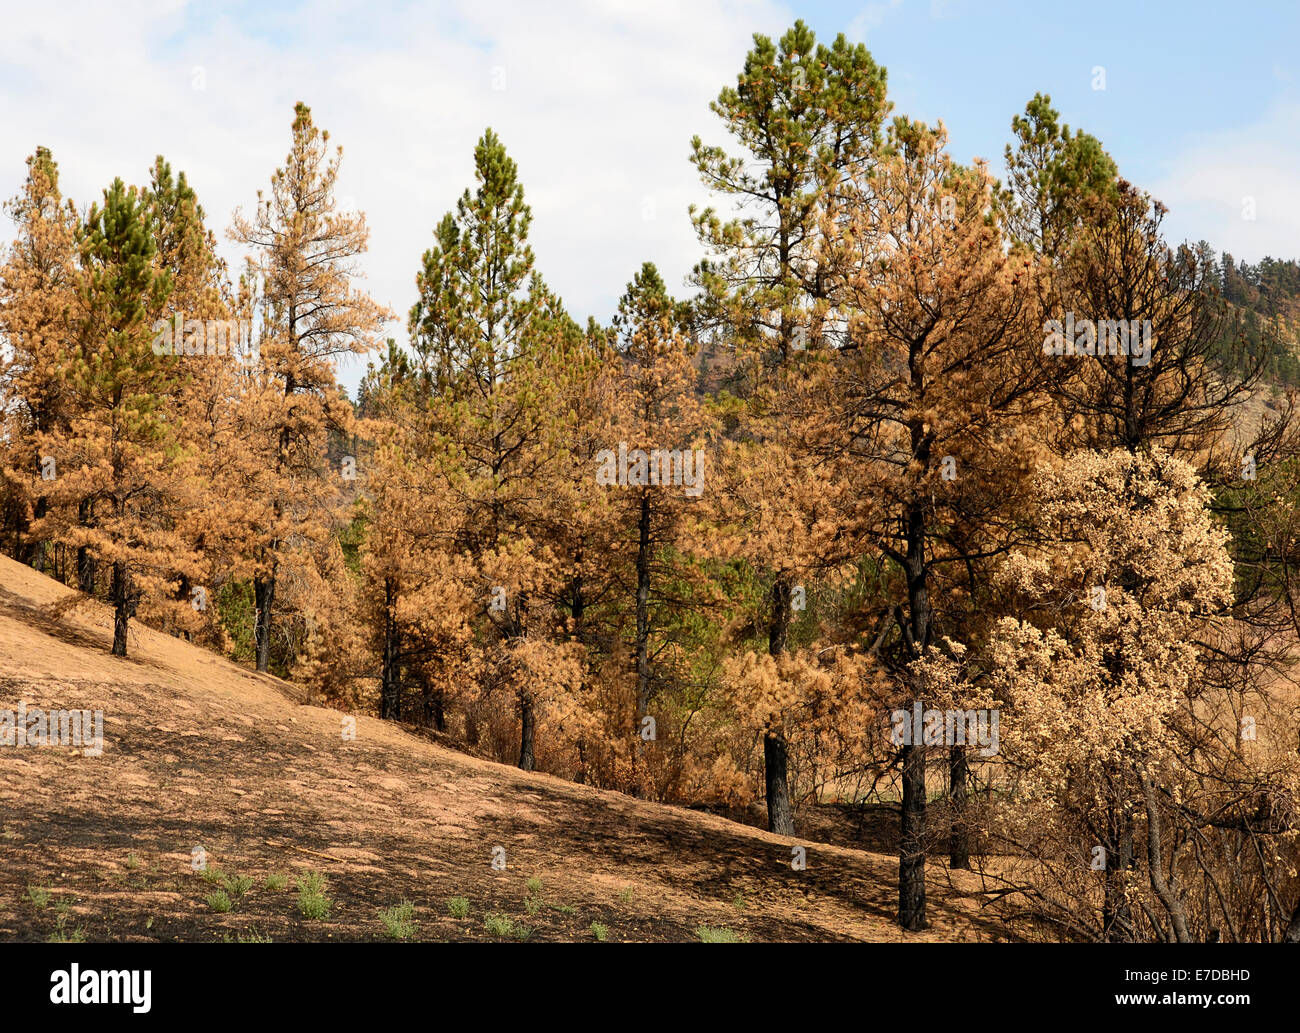 Aftermath of swift forest fire leaving burned pine trees and scorched earth. Stock Photo